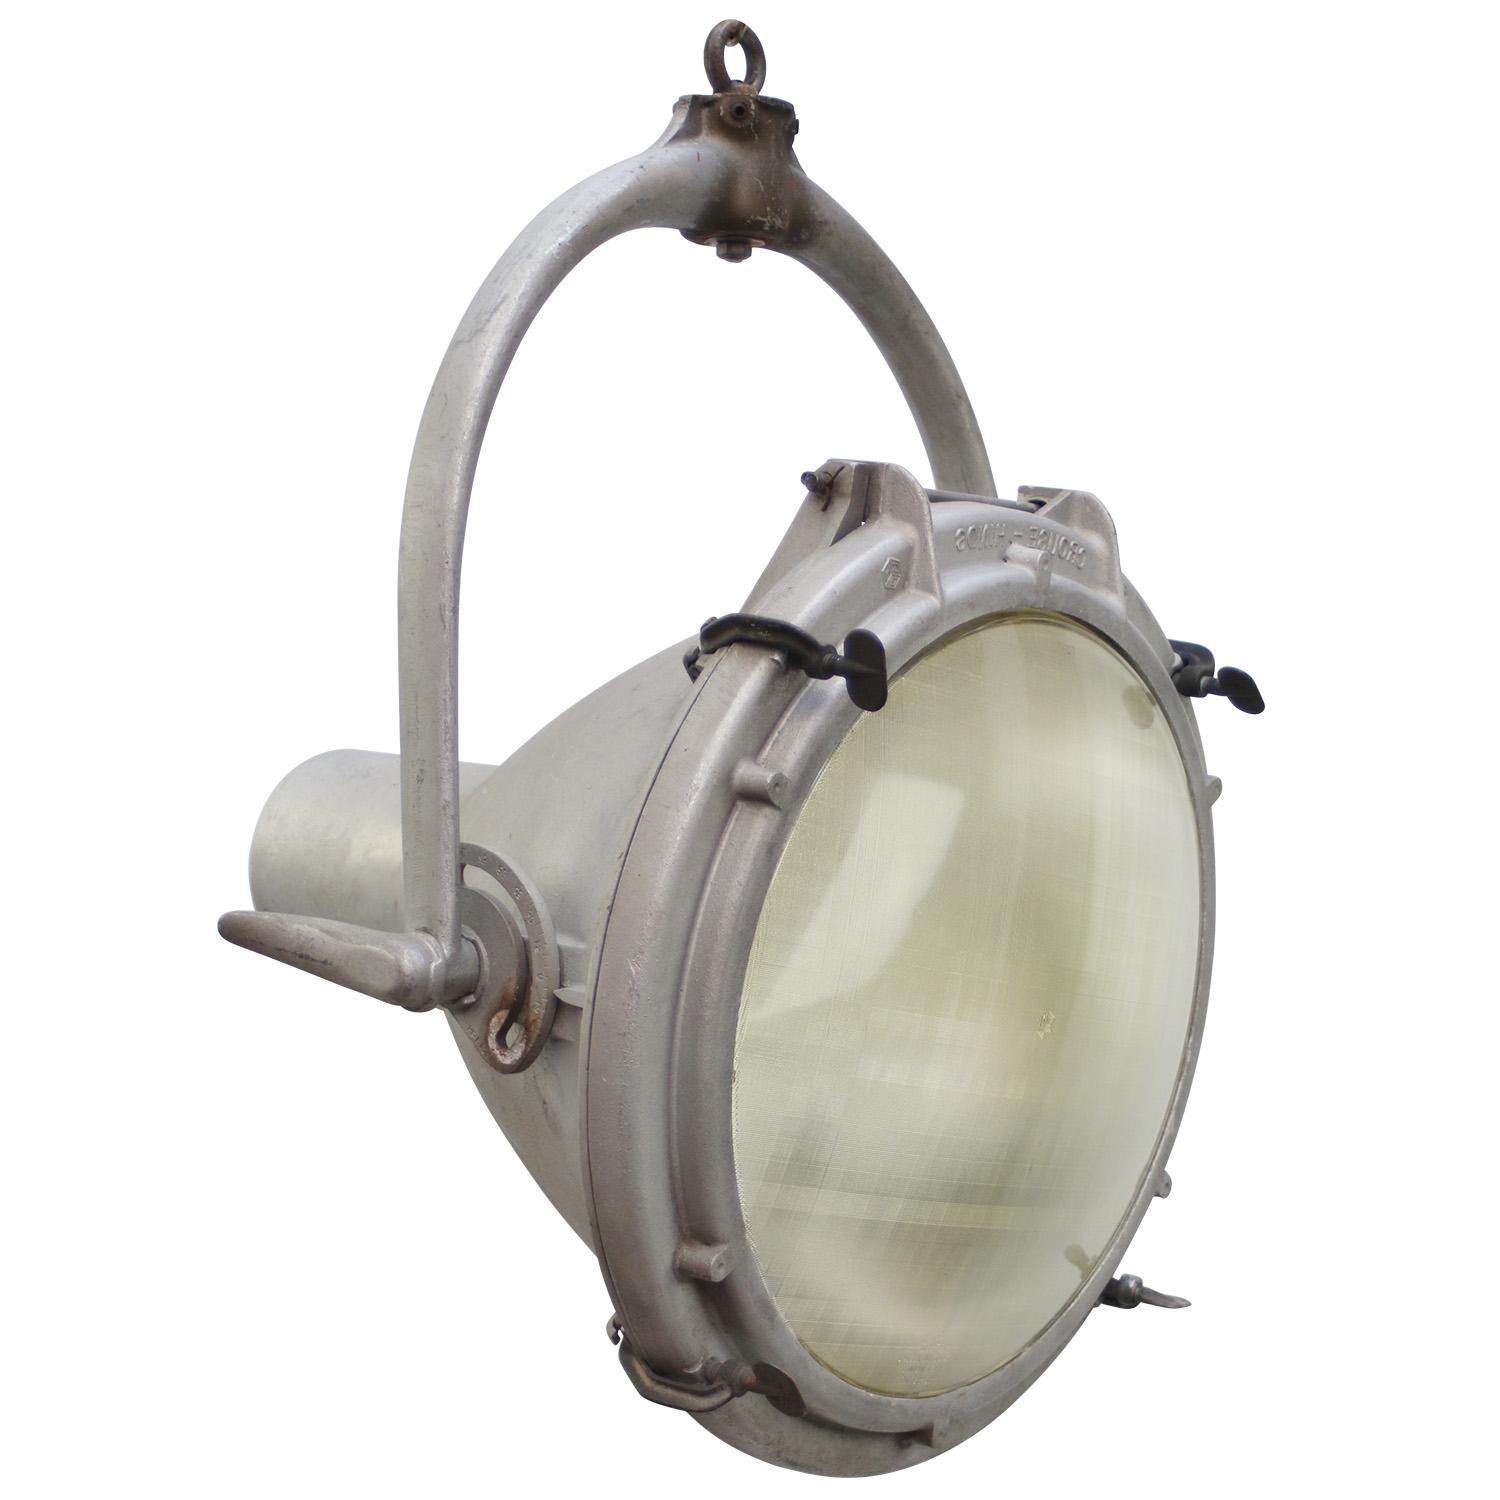 Industrial hanging light Crouse-Hinds Spot USA.
Cast aluminium with frosted glass. 

Weight: 16.50 kg / 36.4 lb

Priced per individual item. All lamps have been made suitable by international standards for incandescent light bulbs, energy-efficient